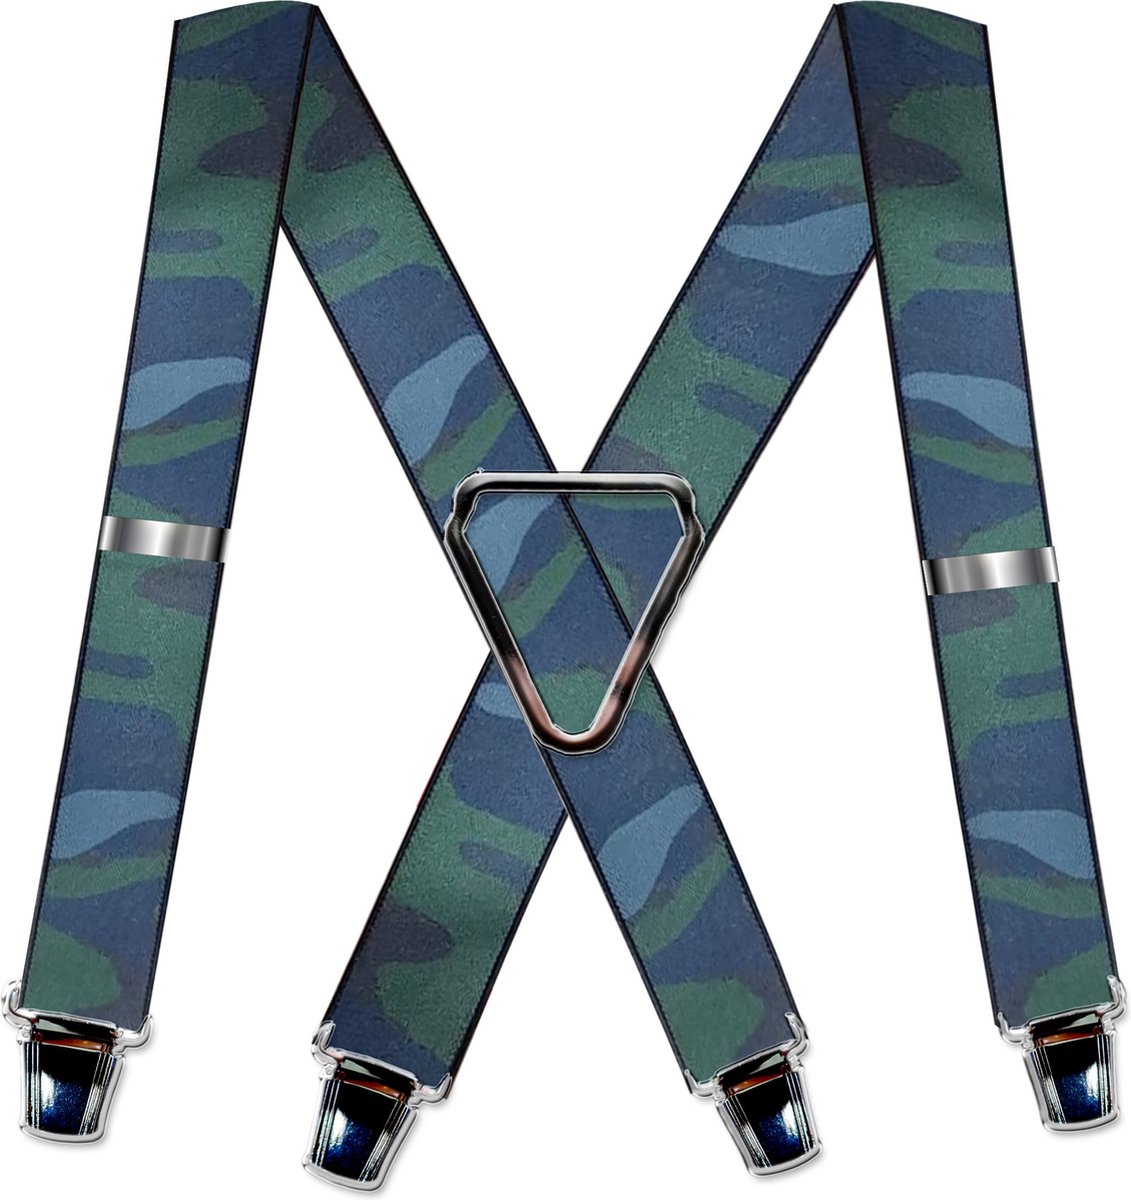 4-point suspenders 'Striped' with wide extra strong sturdy clips Army Camo Color